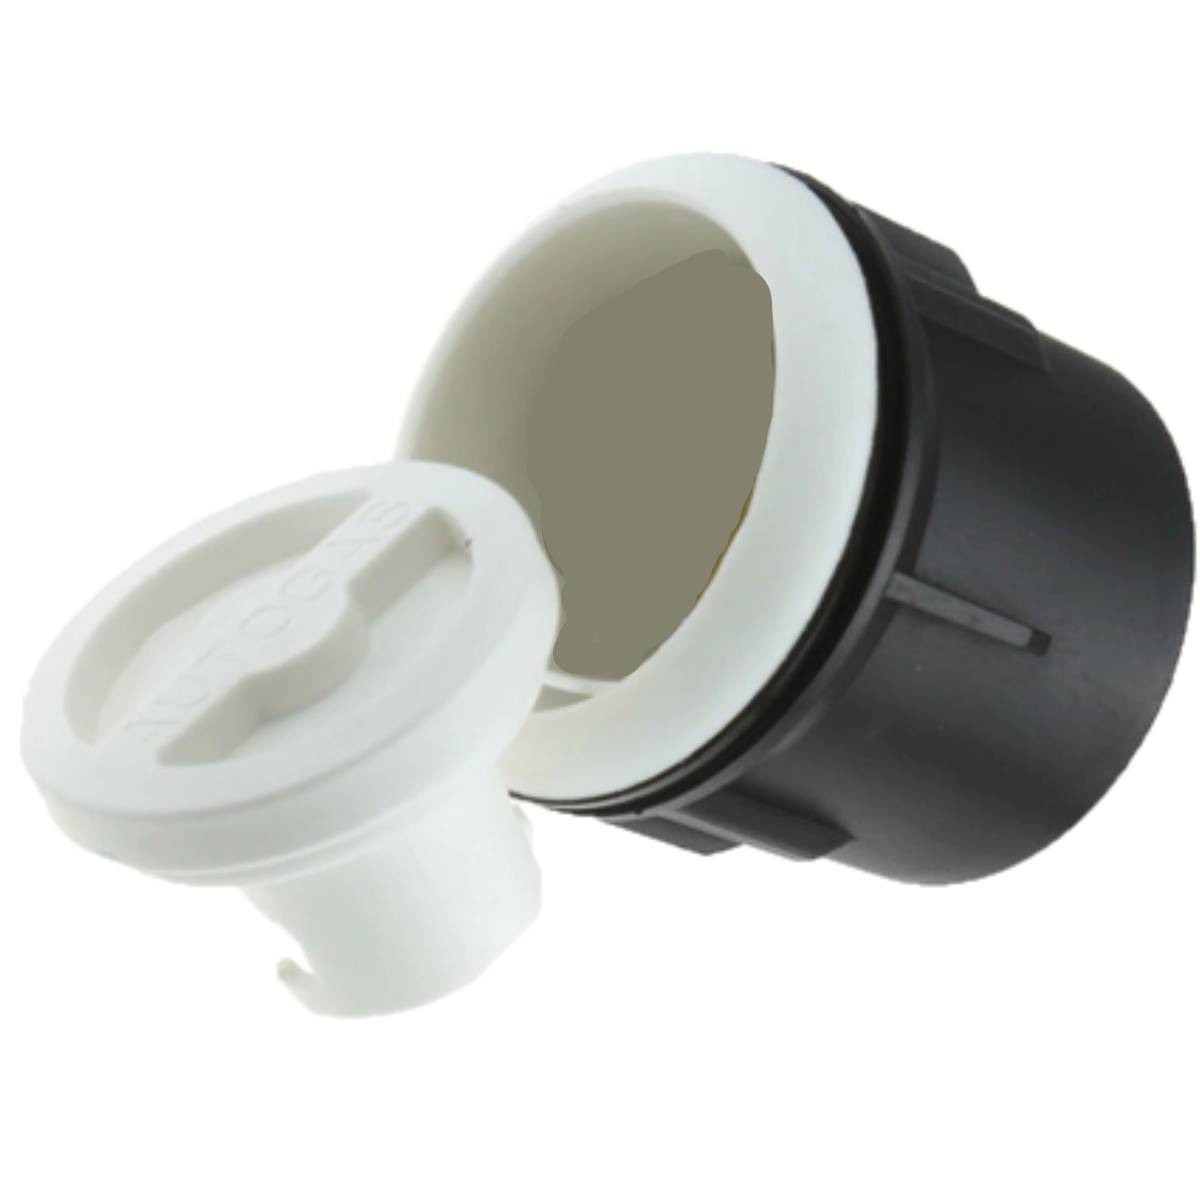 LPG Bayonet Filling Point Fitting Housing Box in White colour